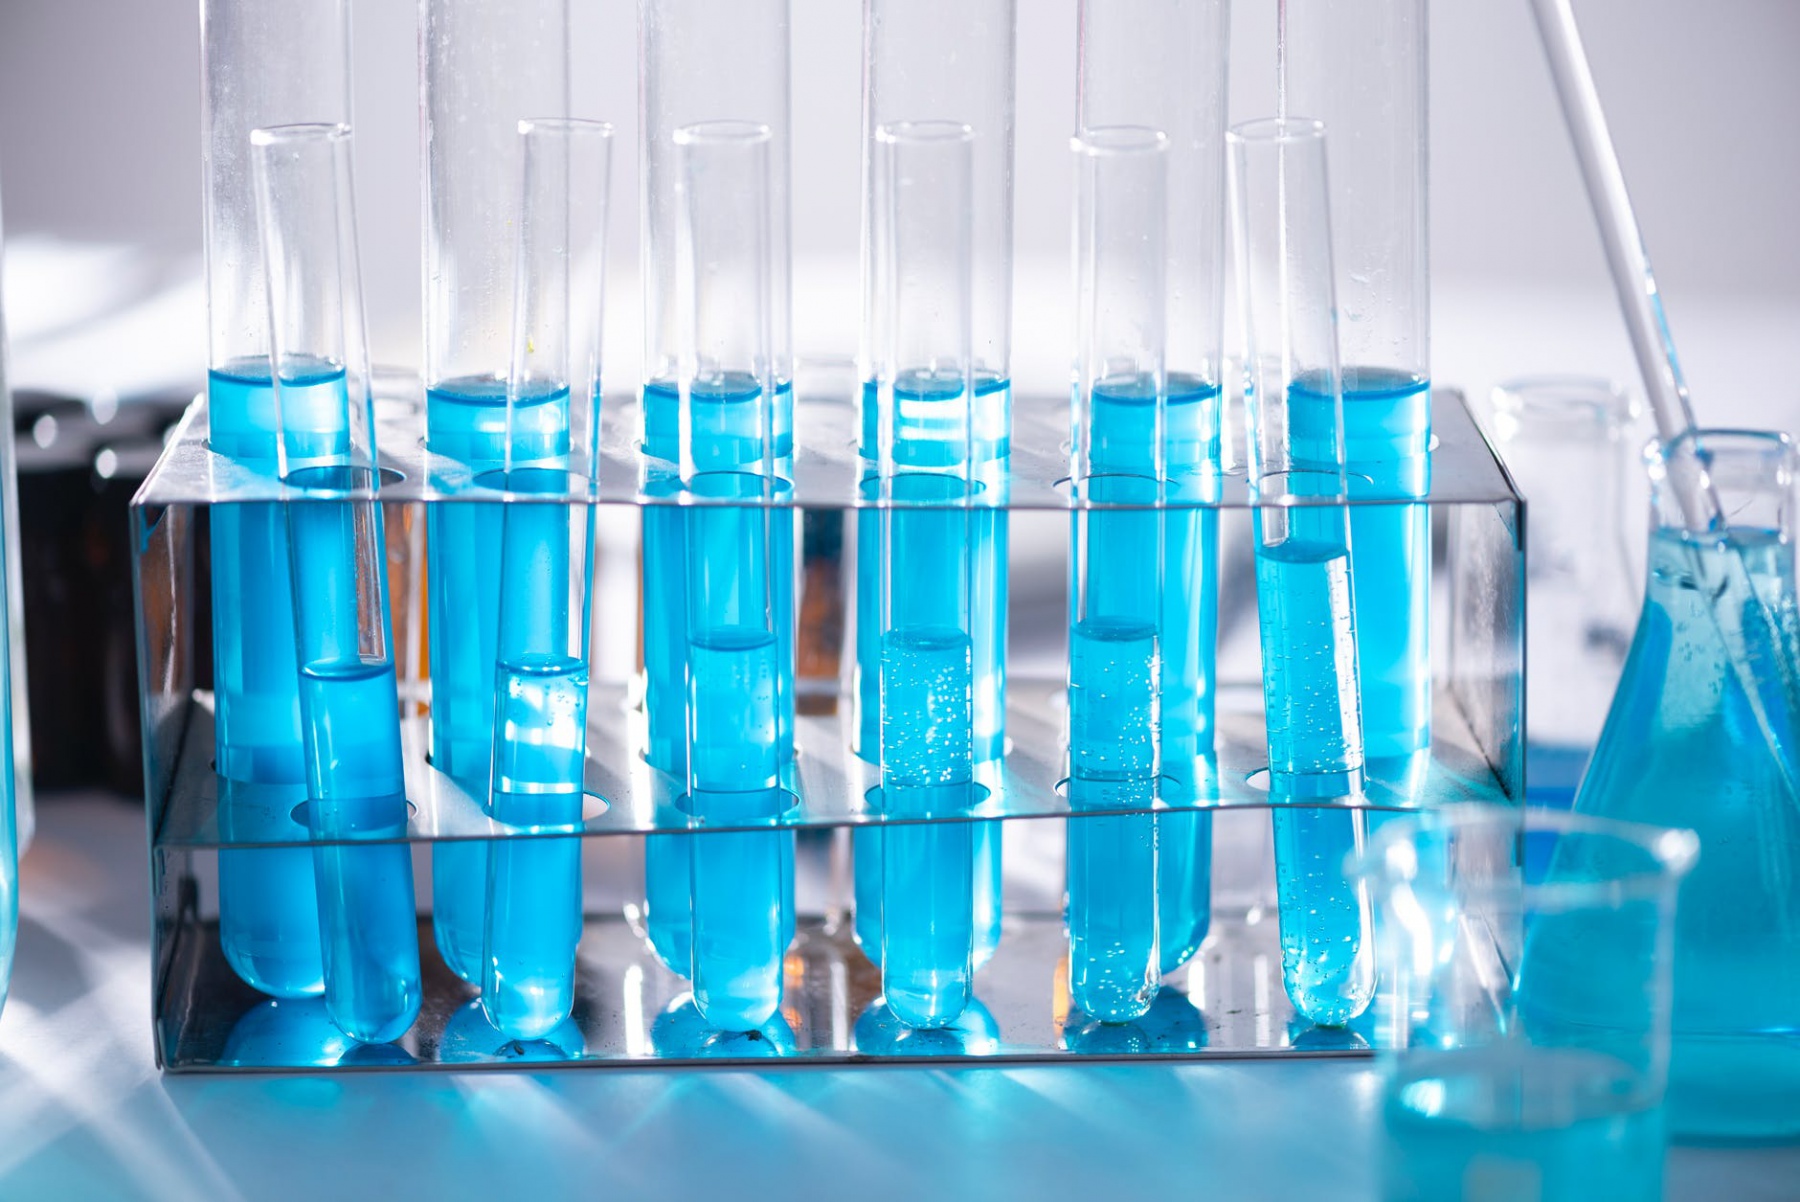 Sample Preparation Systems for Spectroscopy/Chromatography and Mass Spectrometry